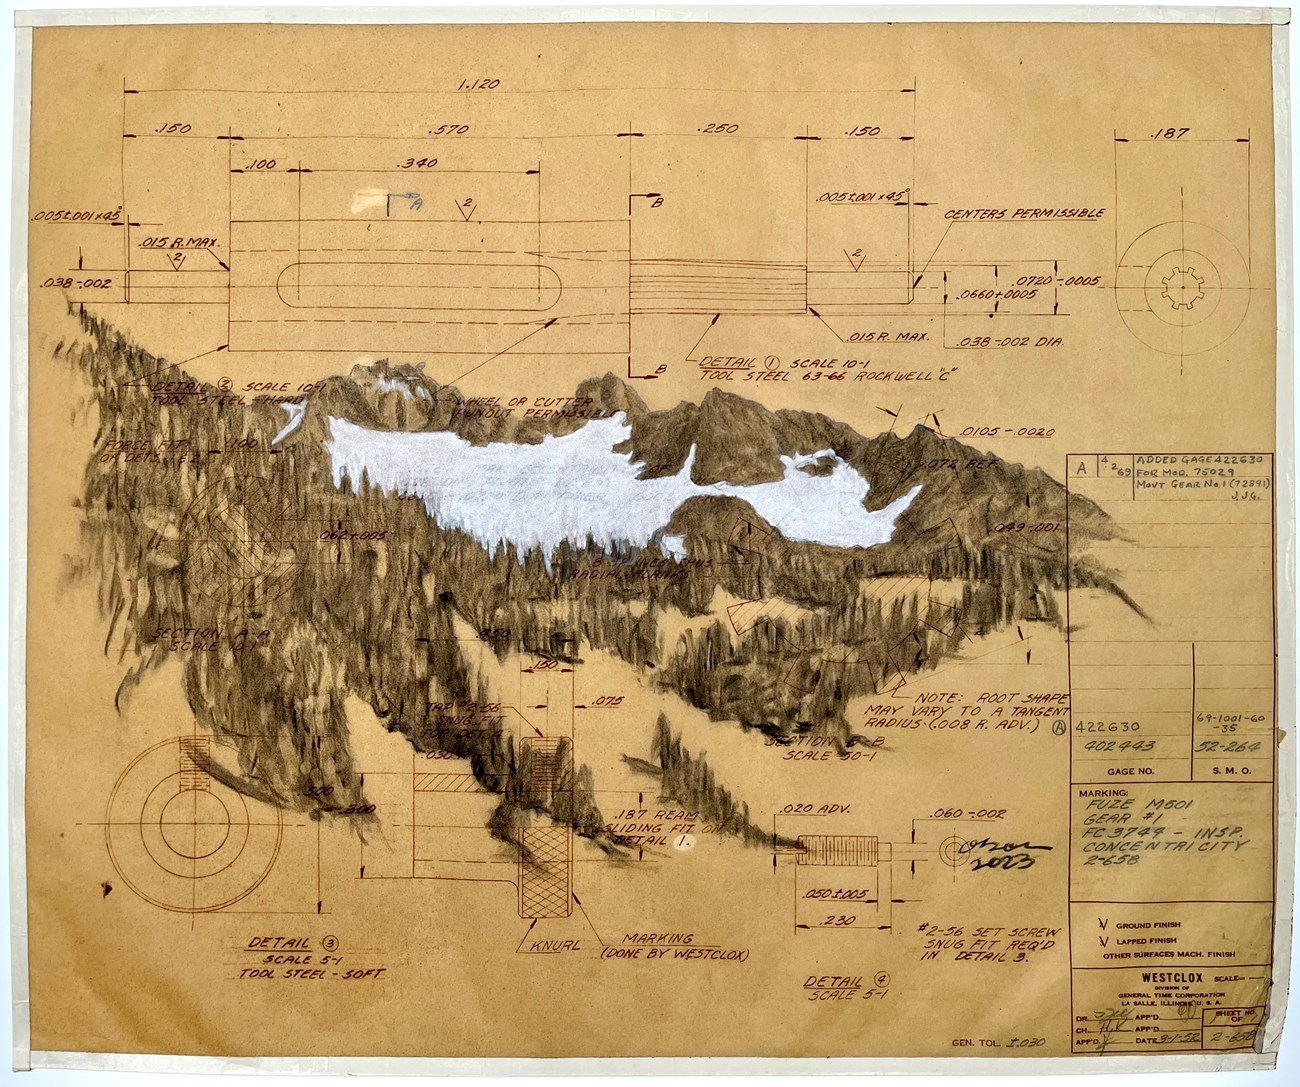 A pencil drawing of a mountain glacier, drawn over an old, hand-written technical drawing on brown paper. The rock and trees of the mountain are drawn in dark charcoal, while the snow of the glacier is white.